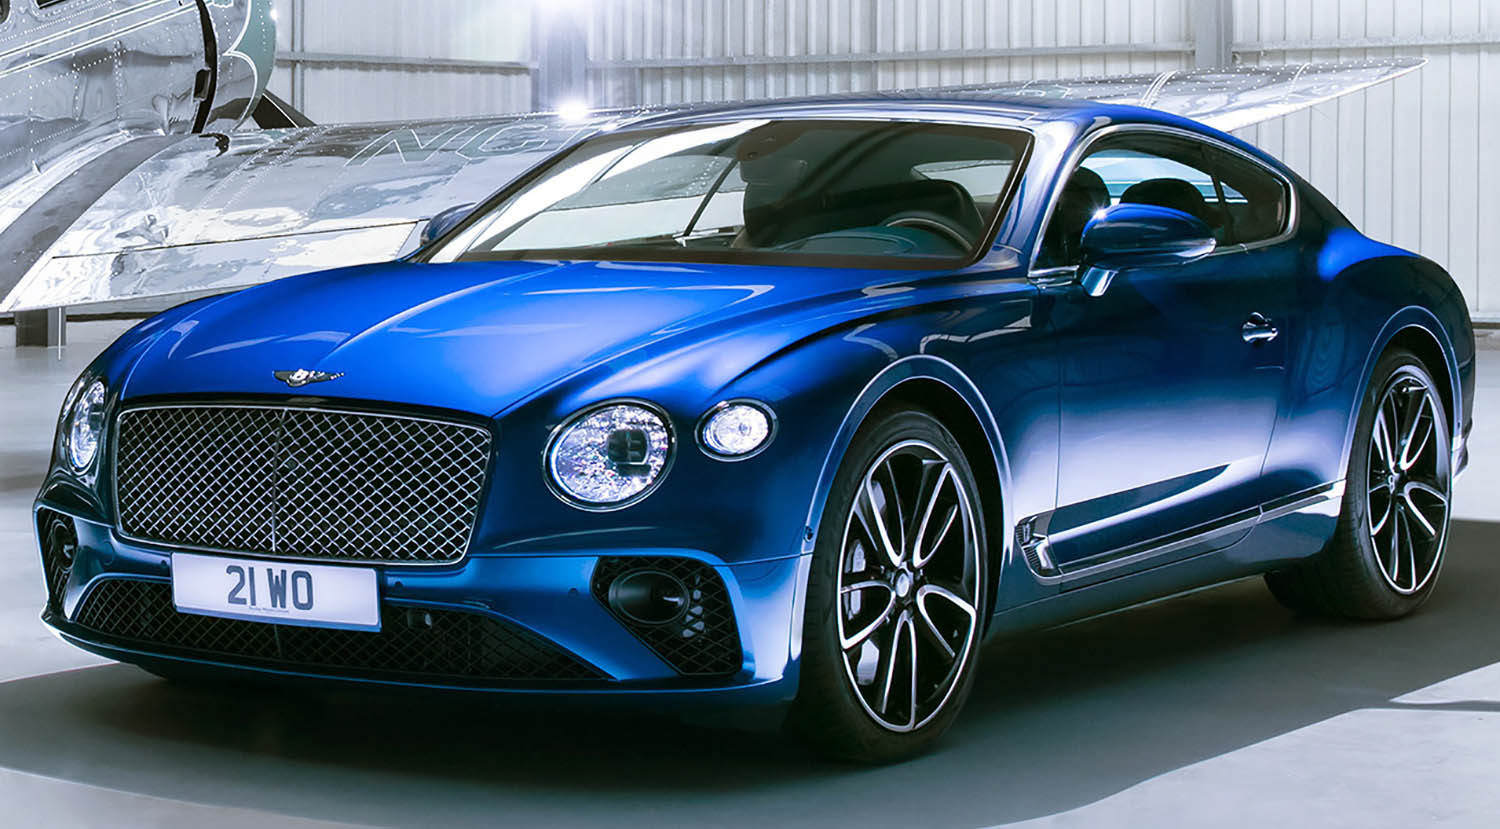 Bentley Continental GT – focused performance with handcrafted luxury